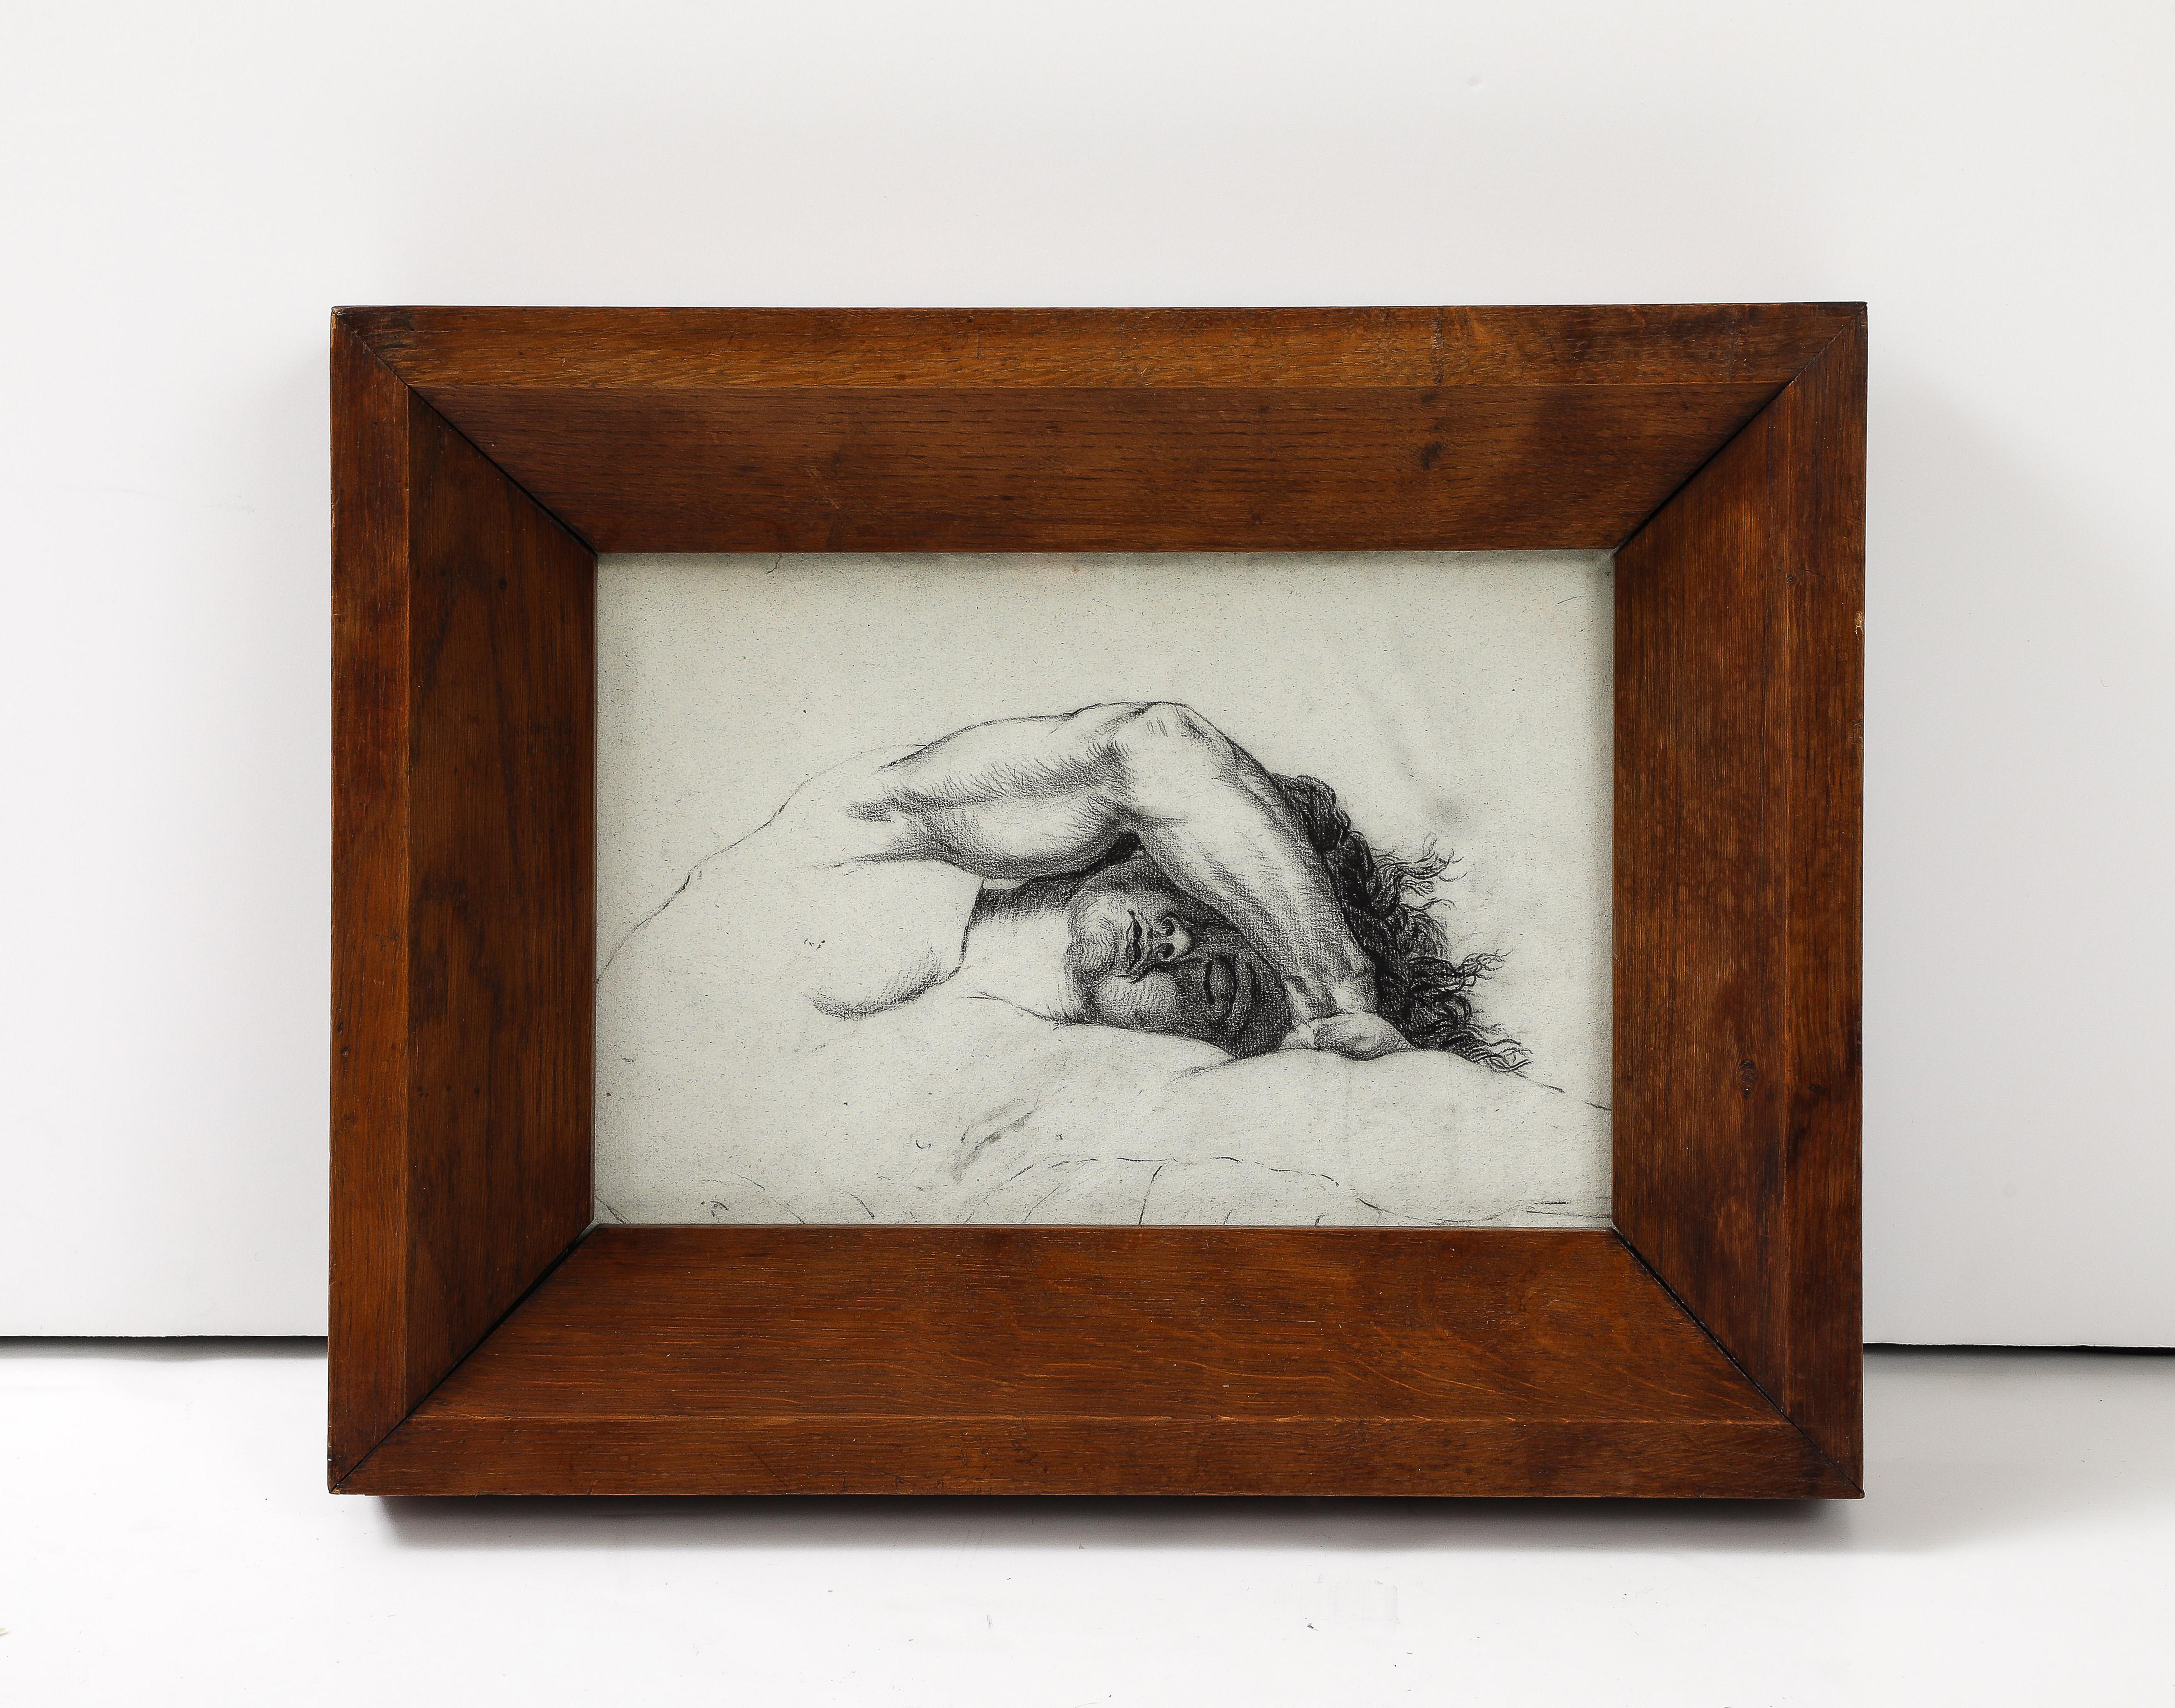 Anonymous, Drawing of Stretching Man, French, c. 1930
ink, graphite

H: 16.6 by 13 by 2.75 in.

Original Frame